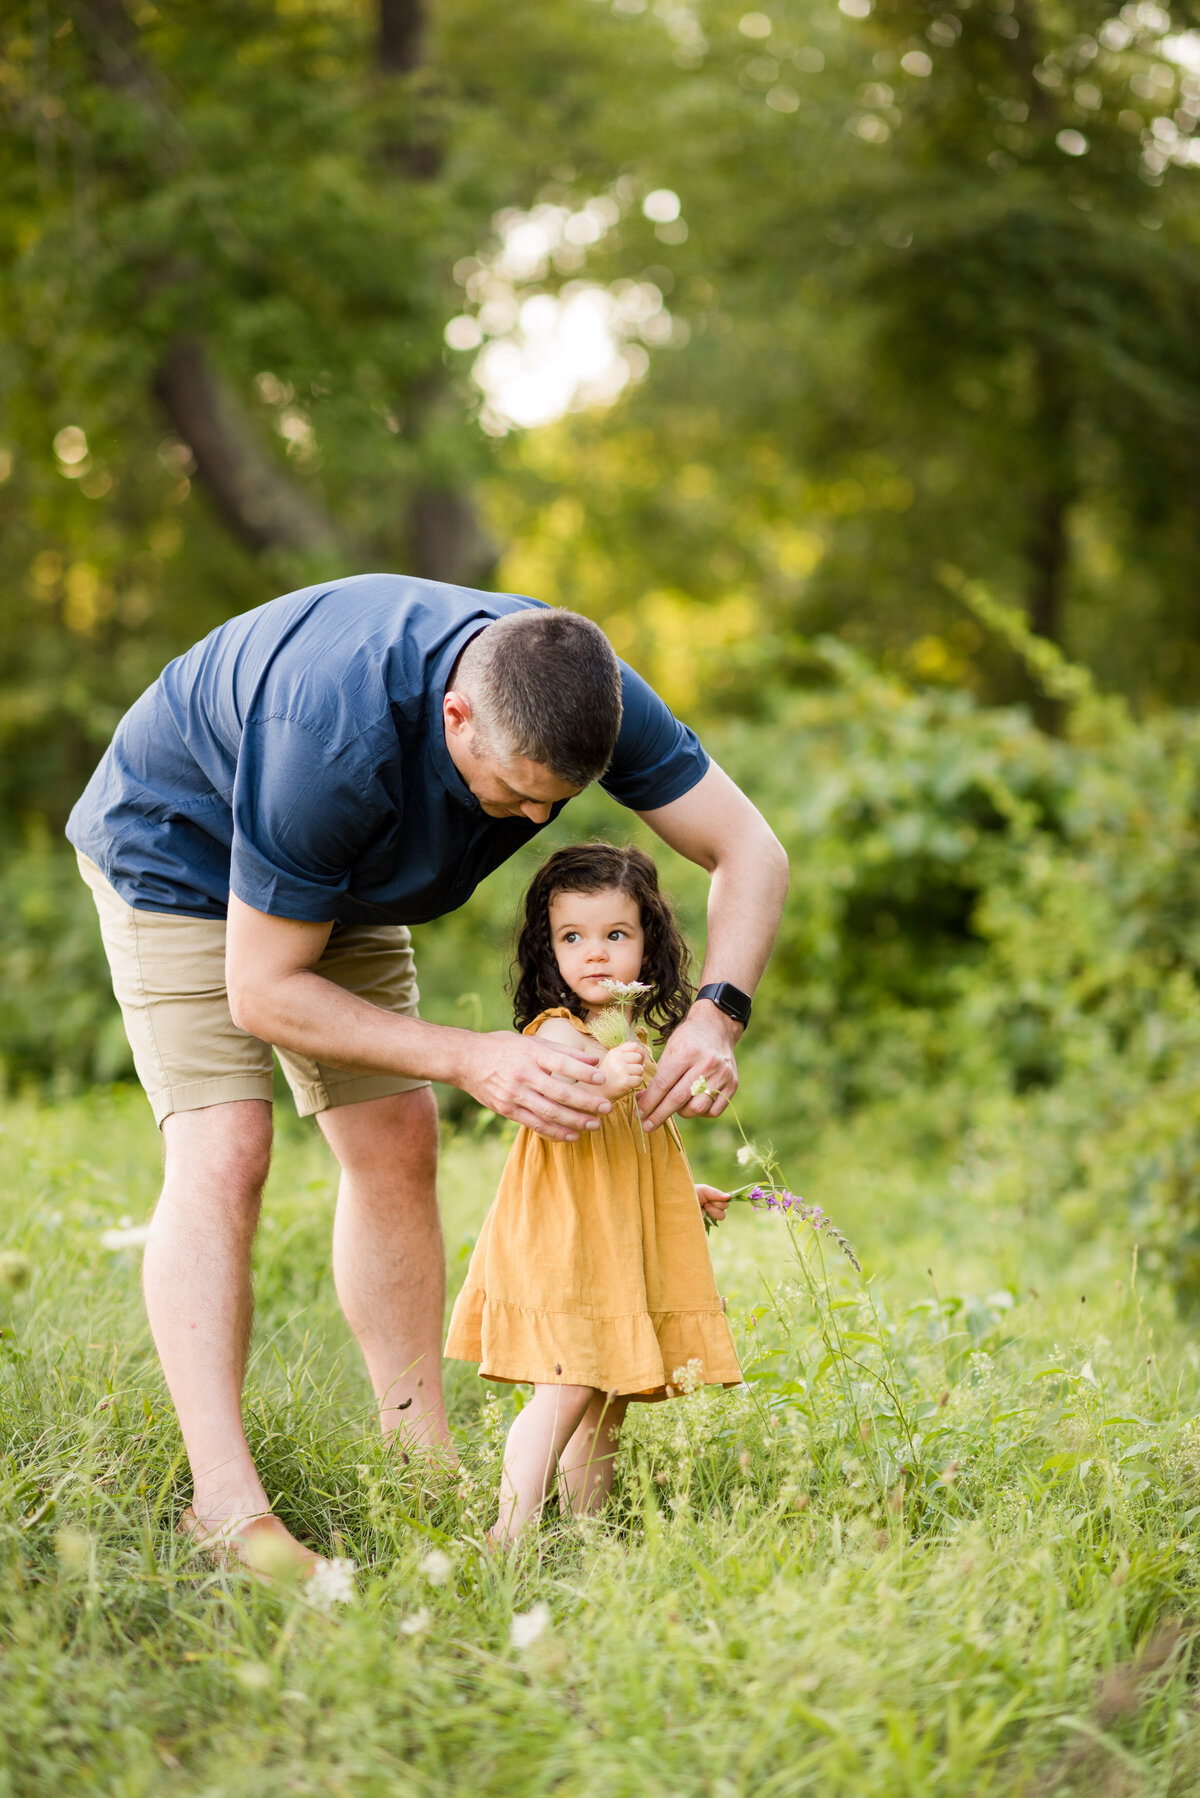 Boston-family-photographer-bella-wang-photography-Lifestyle-session-outdoor-wildflower-21